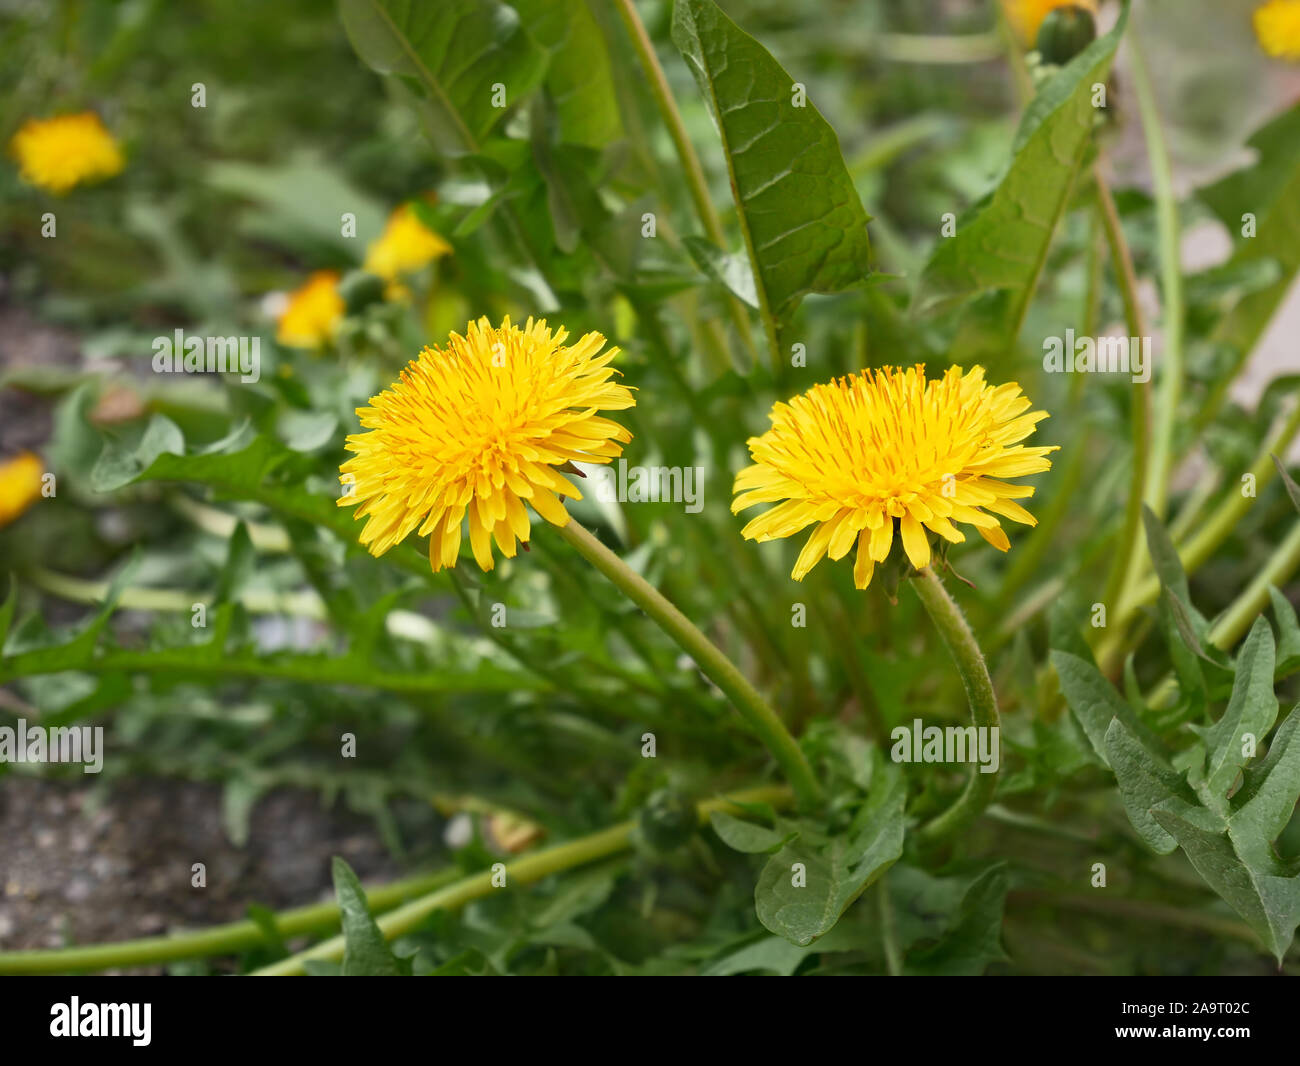 New dandelion plant flowering in springtime, close-up Stock Photo